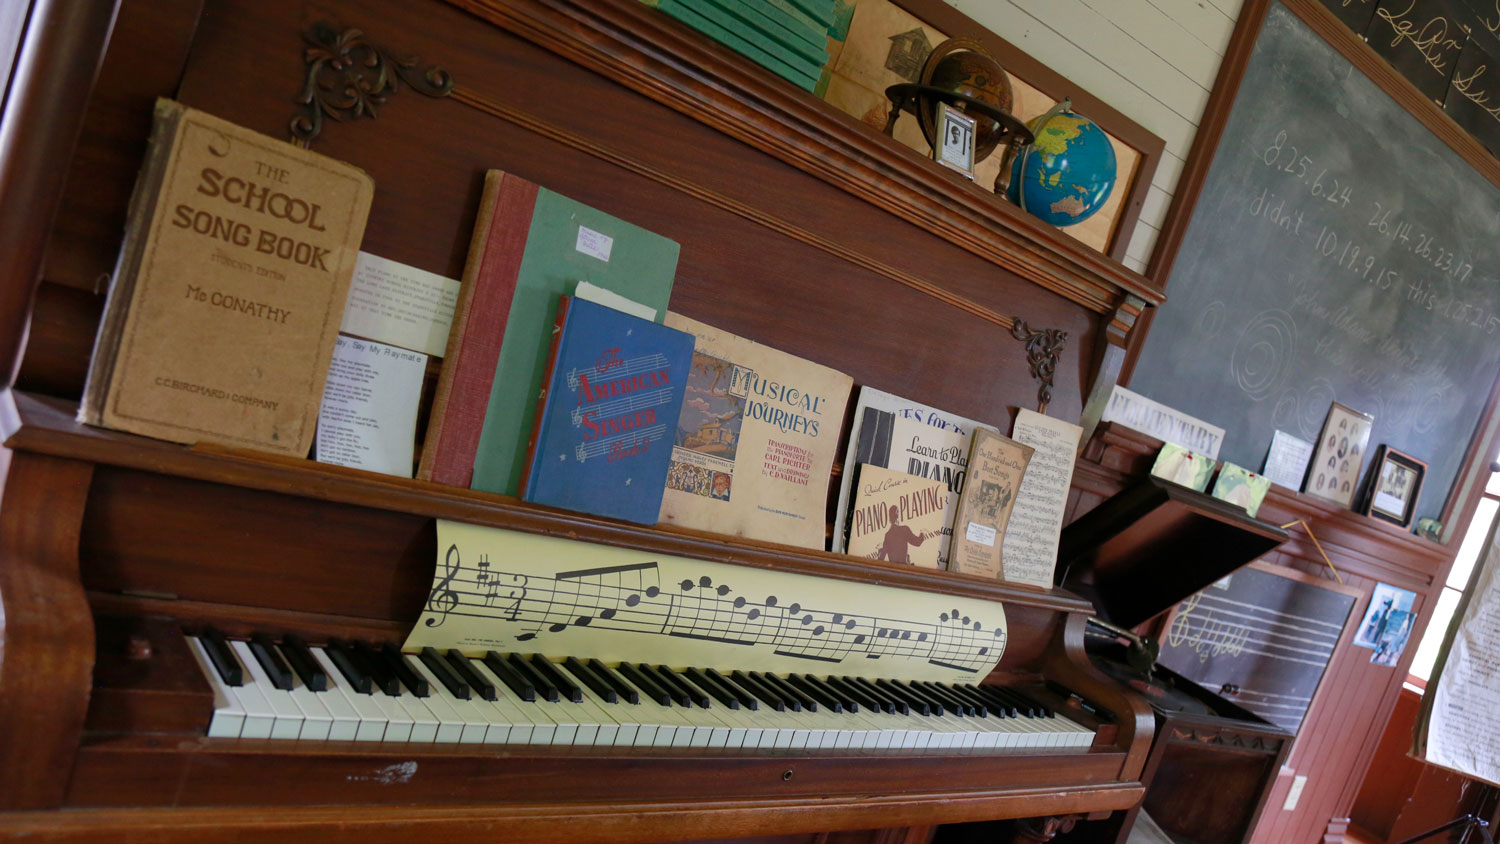 An old upright piano with school song books. 